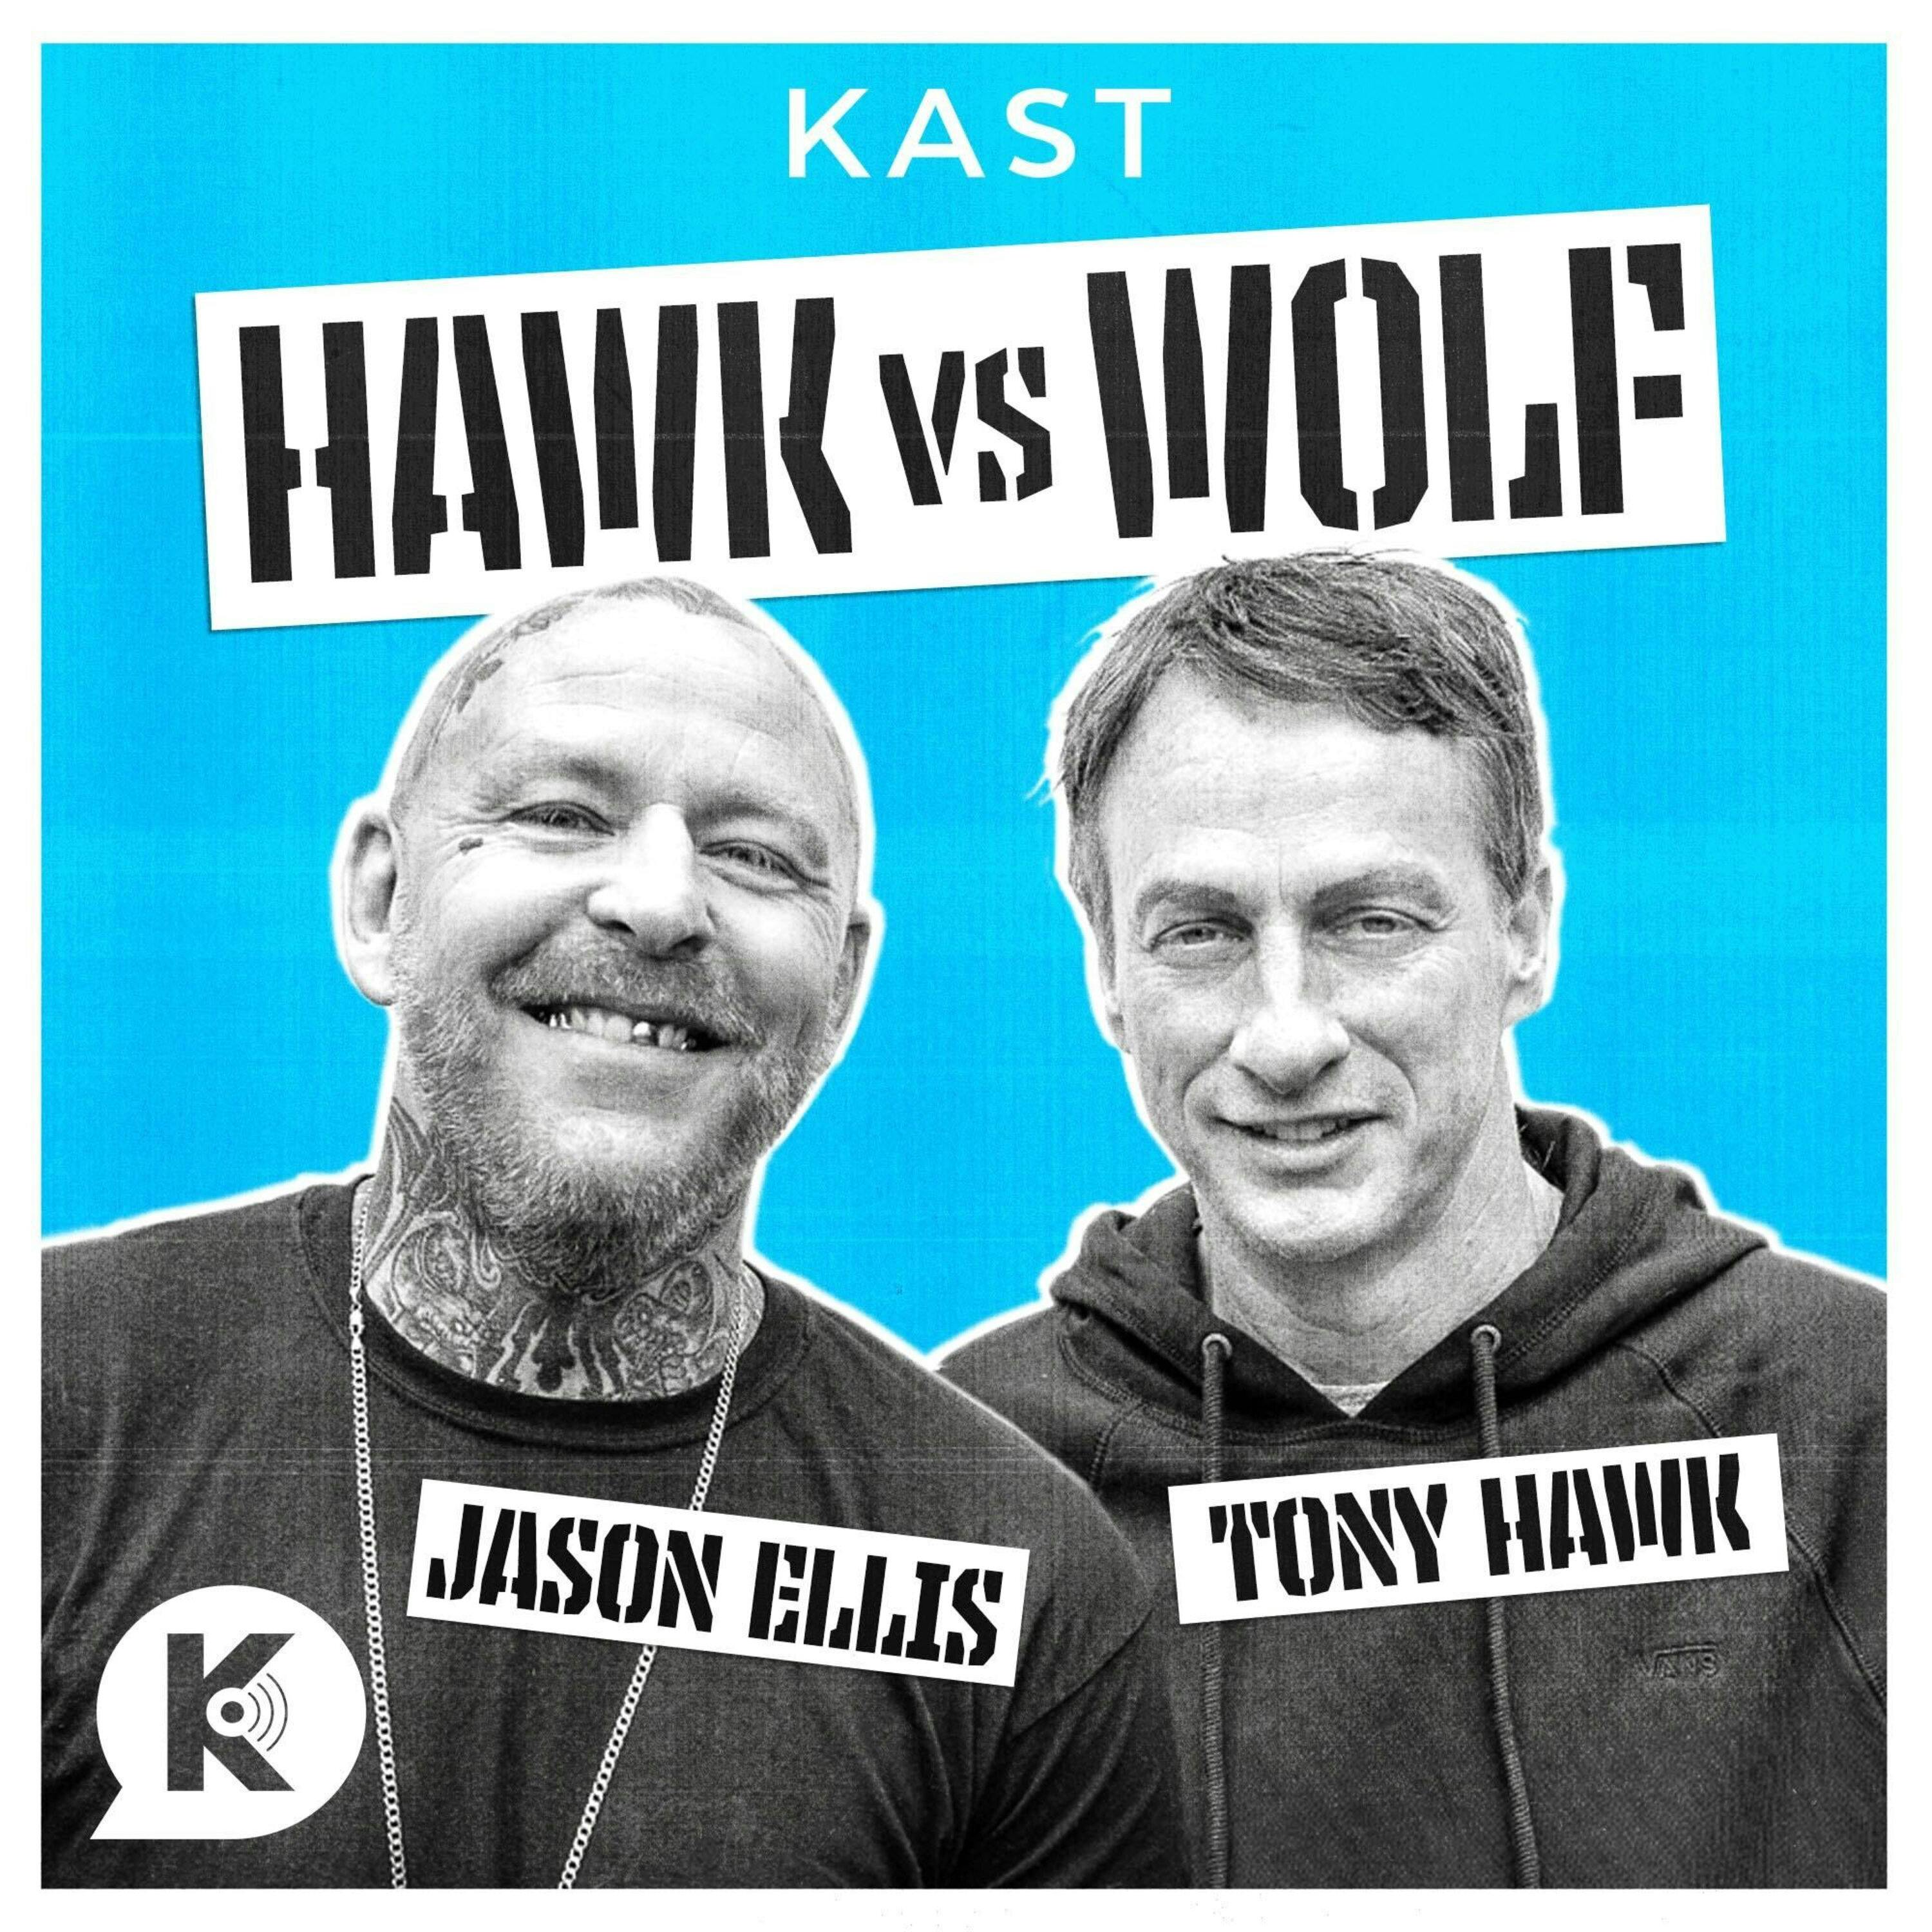 Welcome to Hawk vs Wolf!